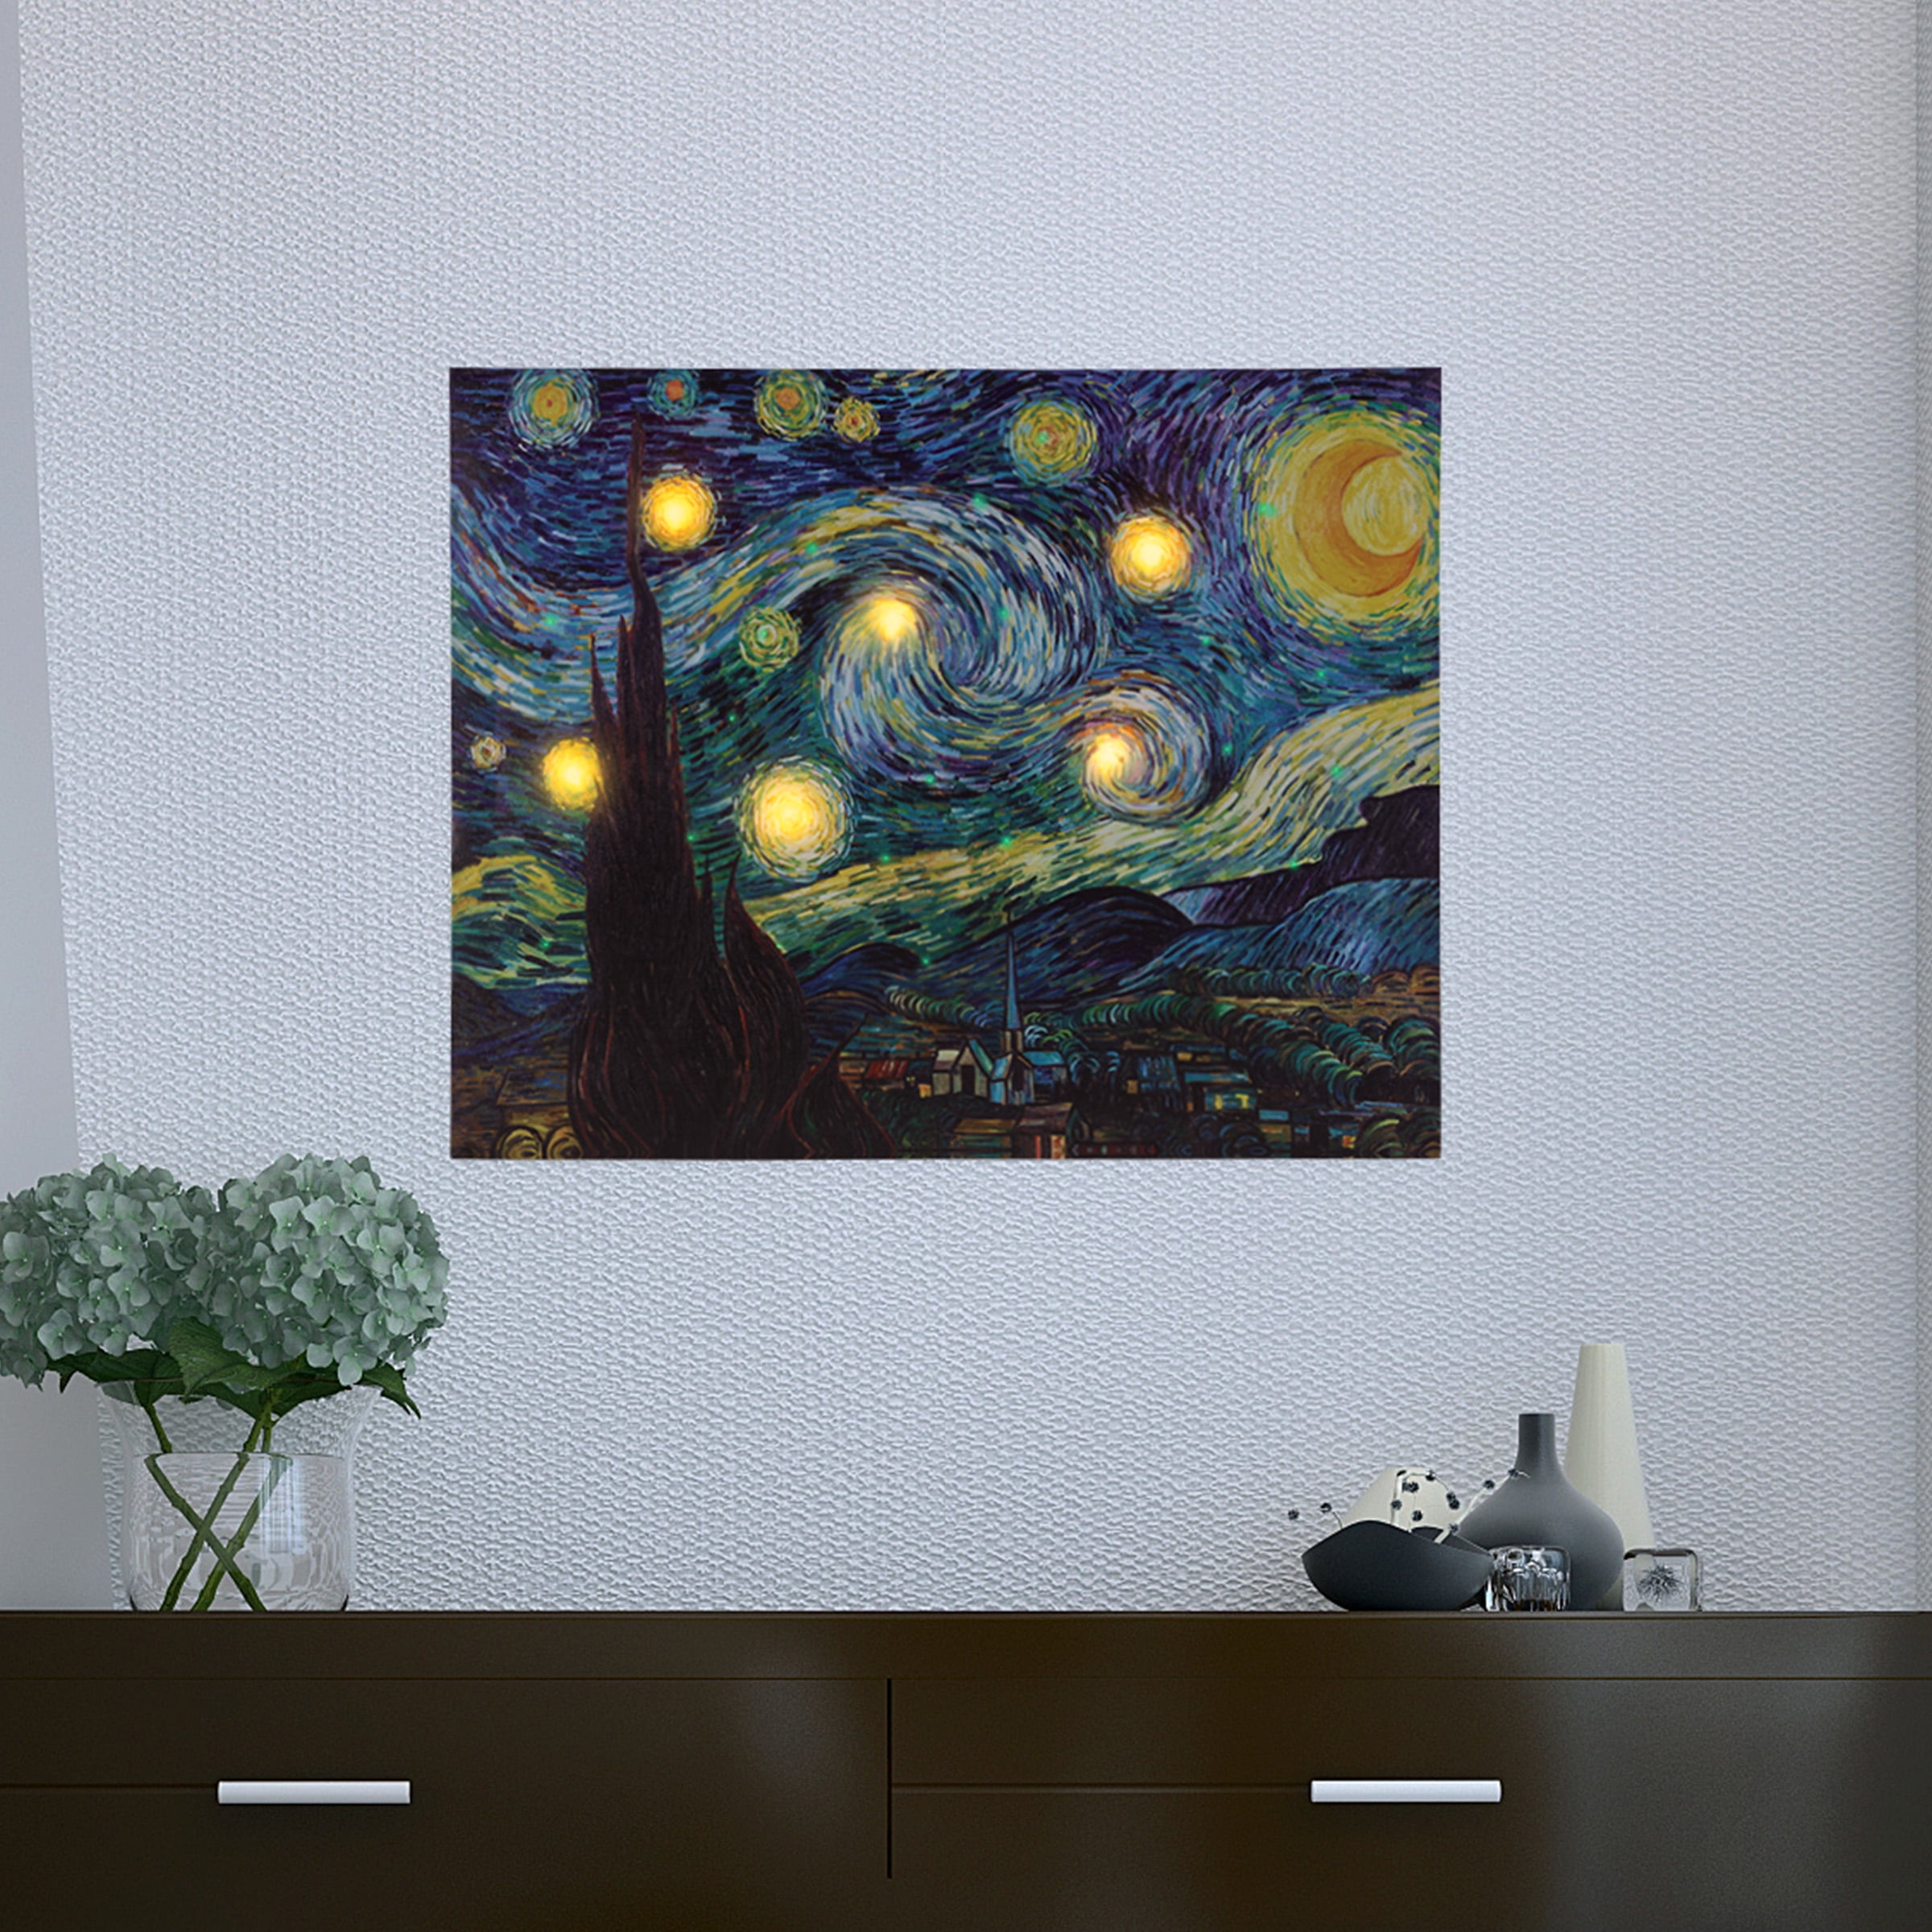 5 Panel Wall Art Canvas Set Abstract Starry Night Picture By Van